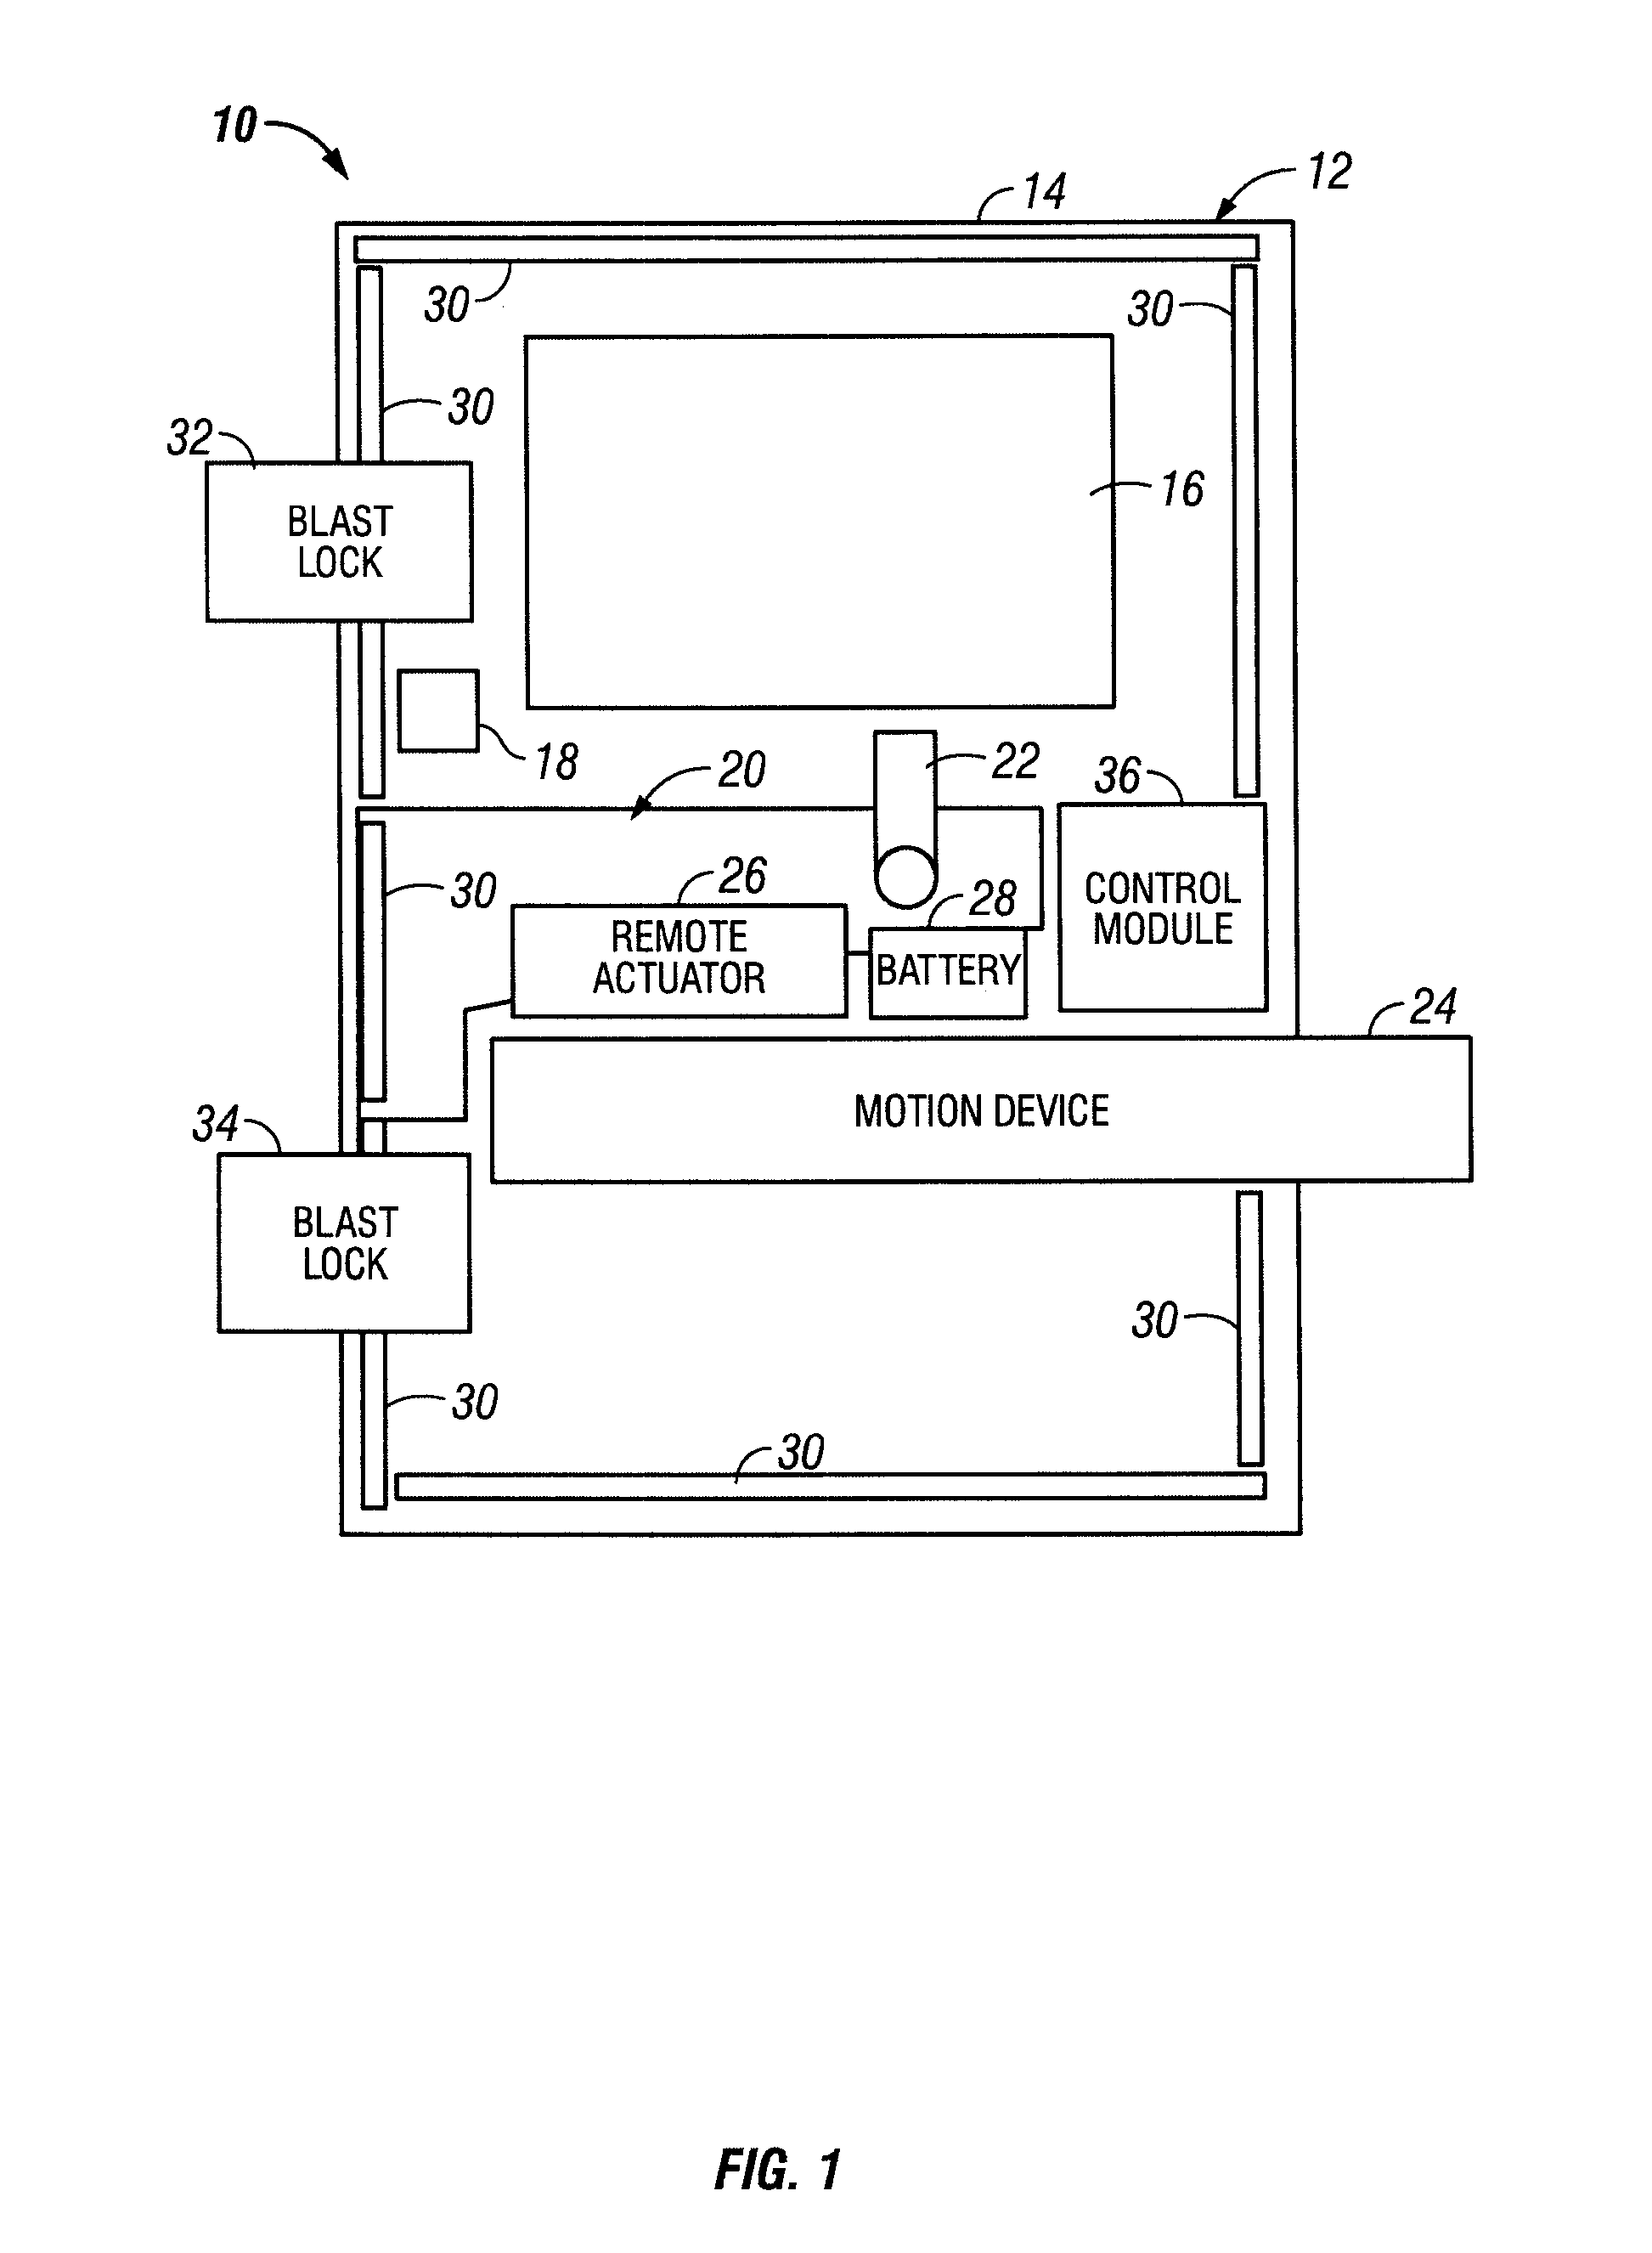 Control system for power-assisted door